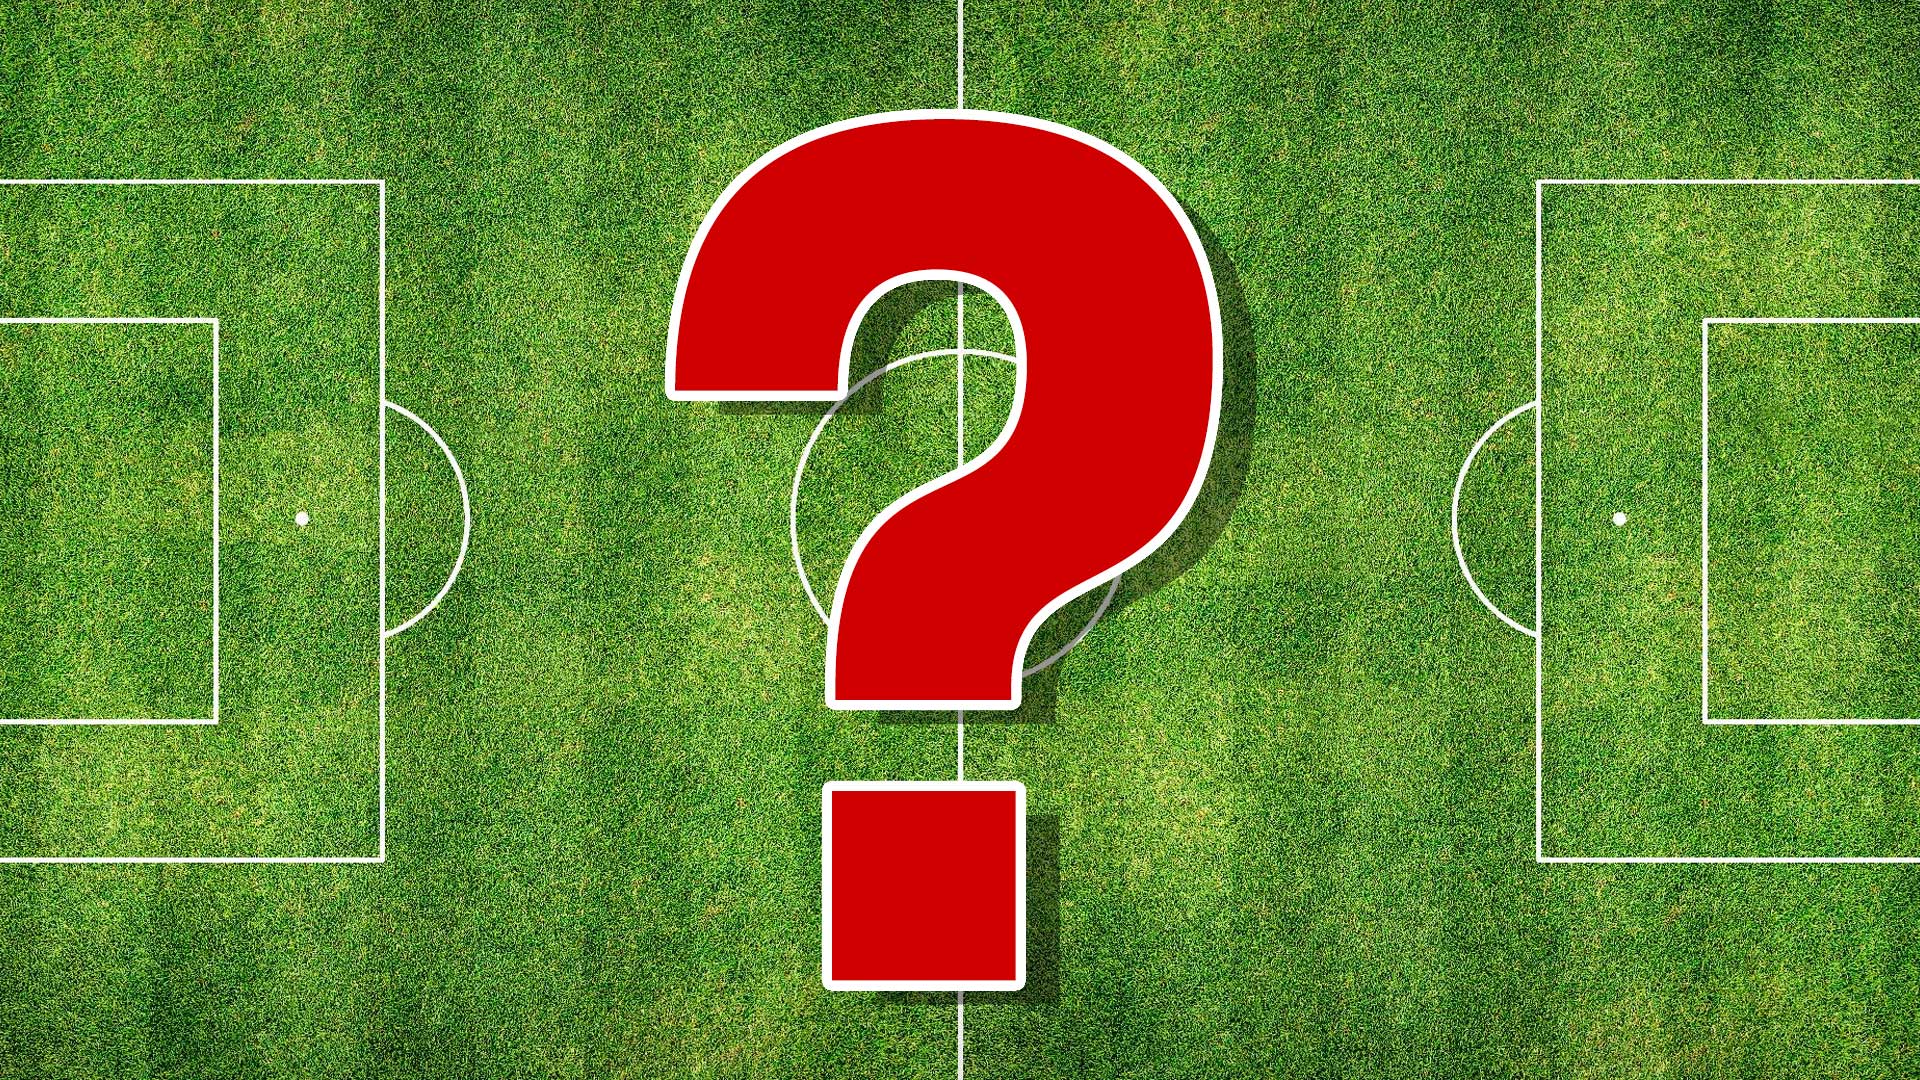 A football pitch with a big question mark on it